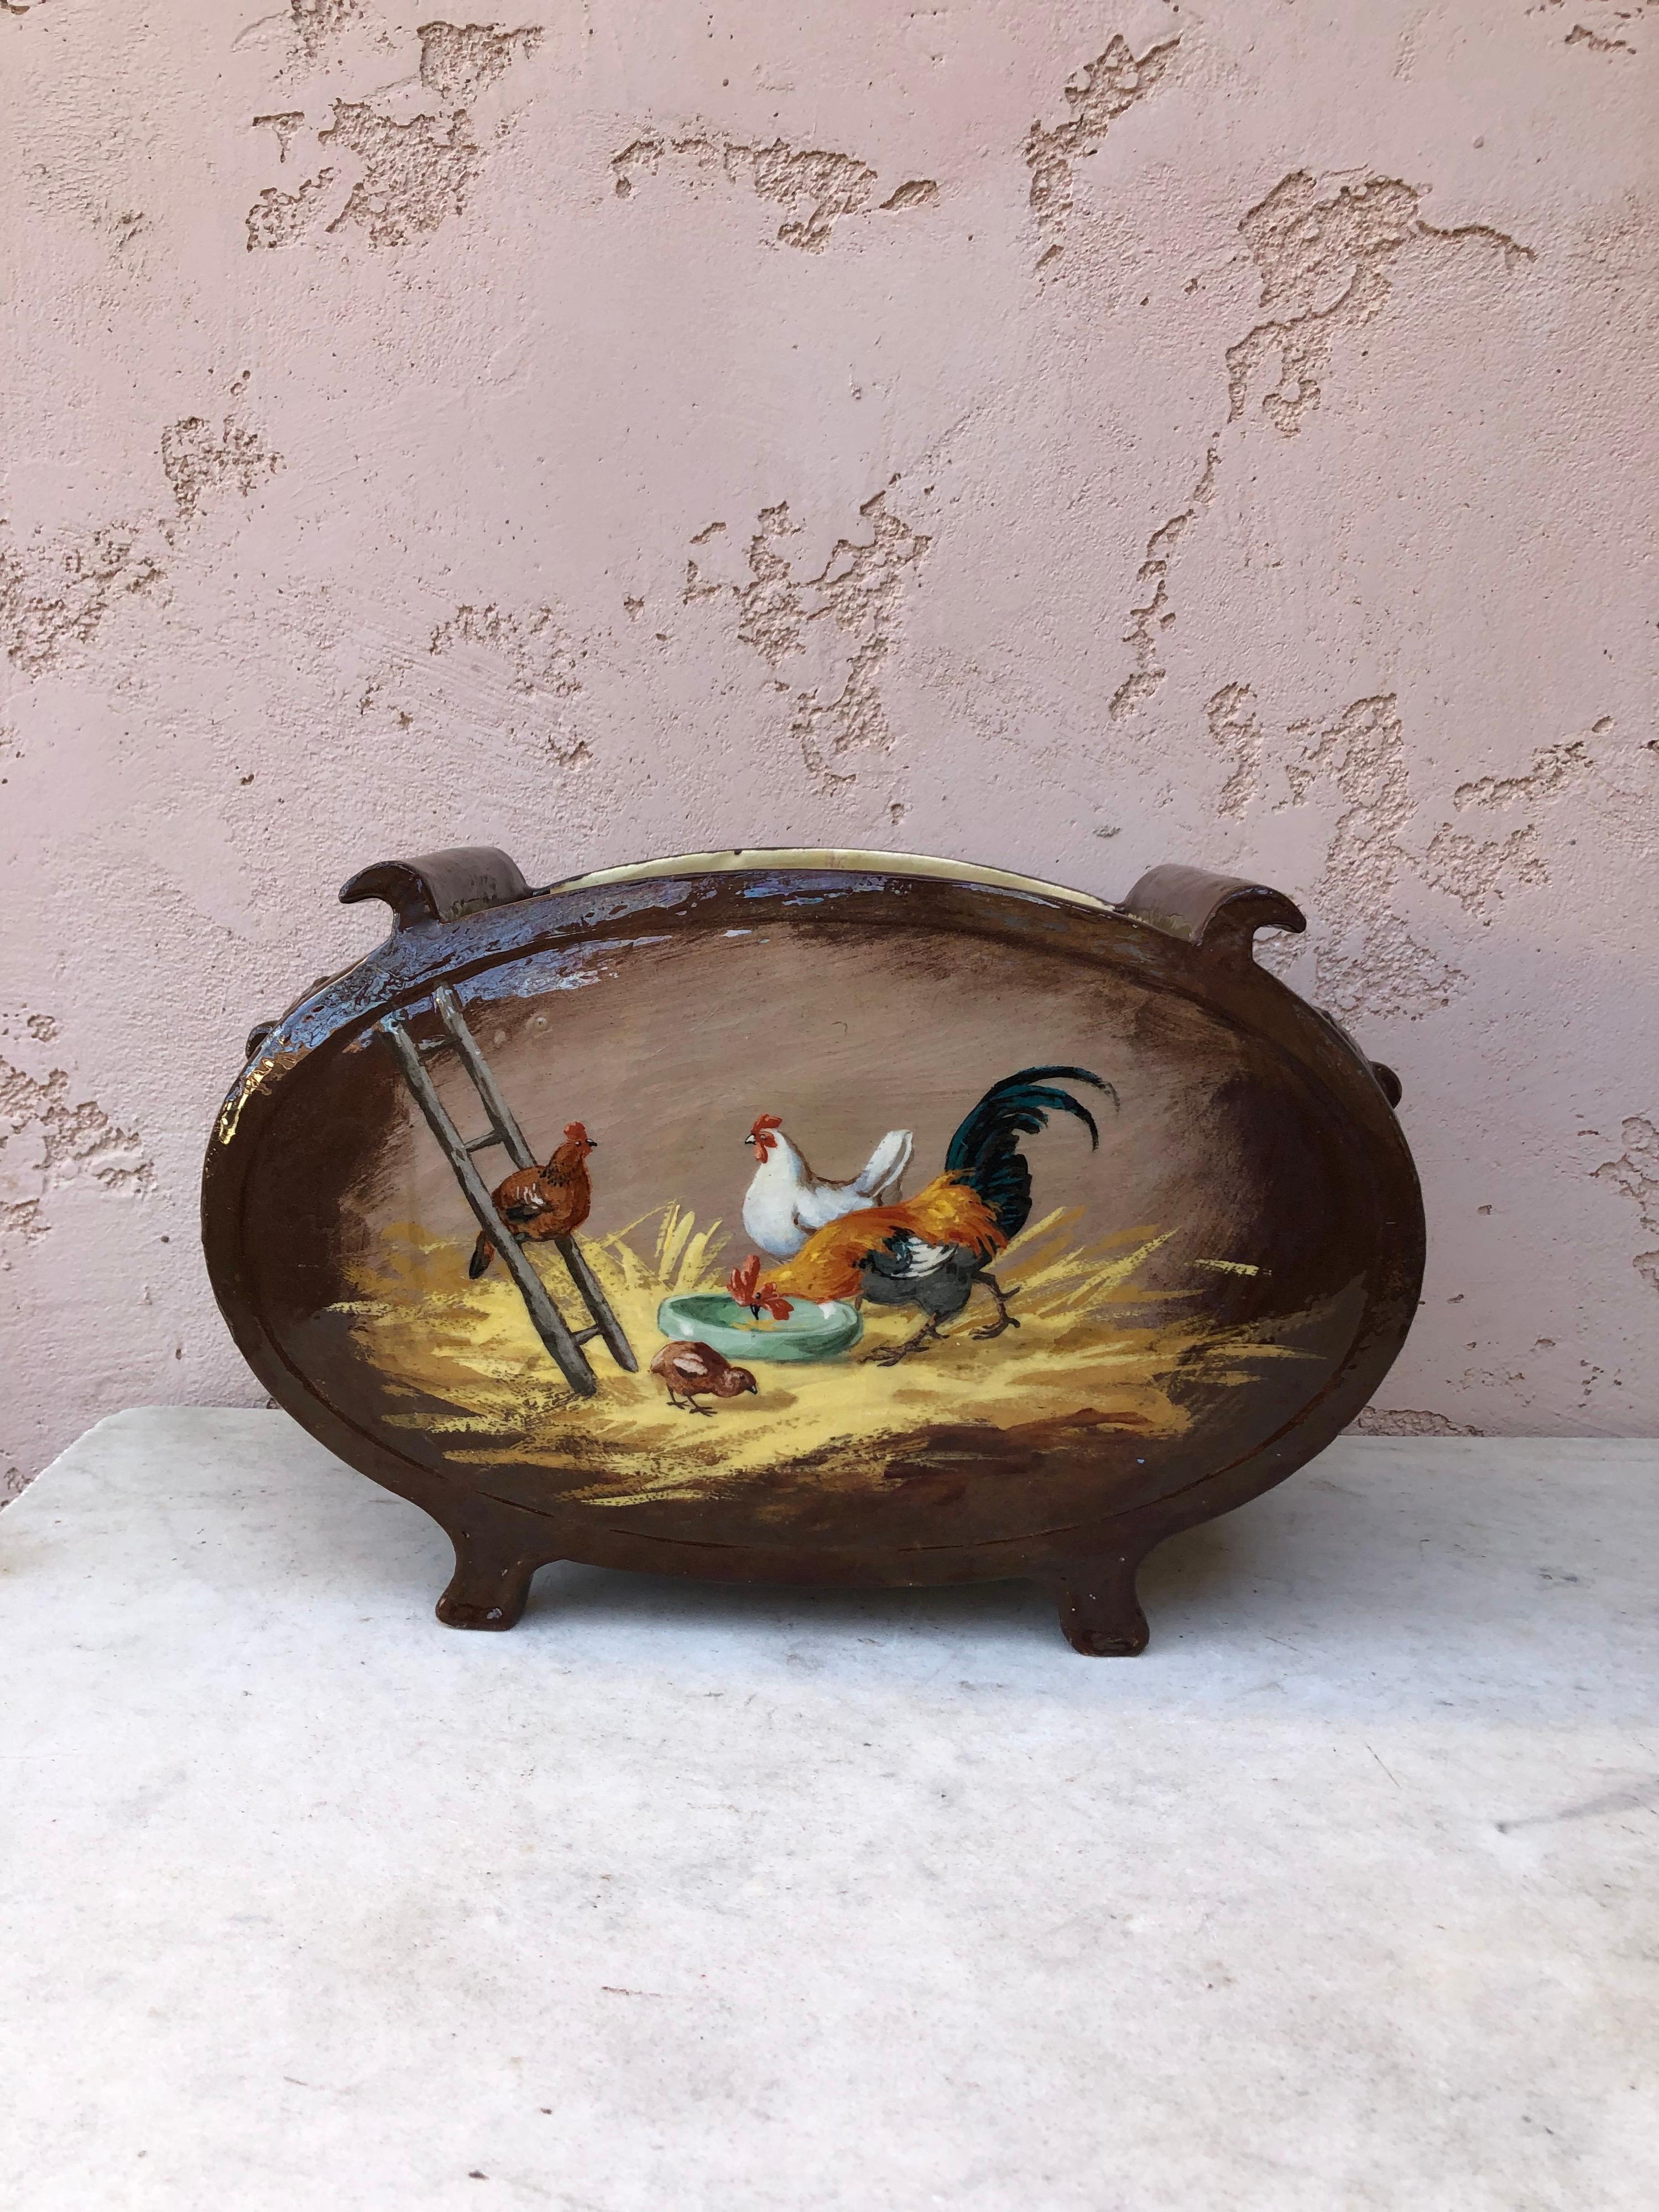 Large 19th French Jardiniere With Horses & Barnyard Albert Leon Lebarque.
One side have painting is horses on a stable and the other side a barnyard.
Very high quality ceramic , an impressive painting.
Albert Léon Lebarque ( 1853-1939 ) was a